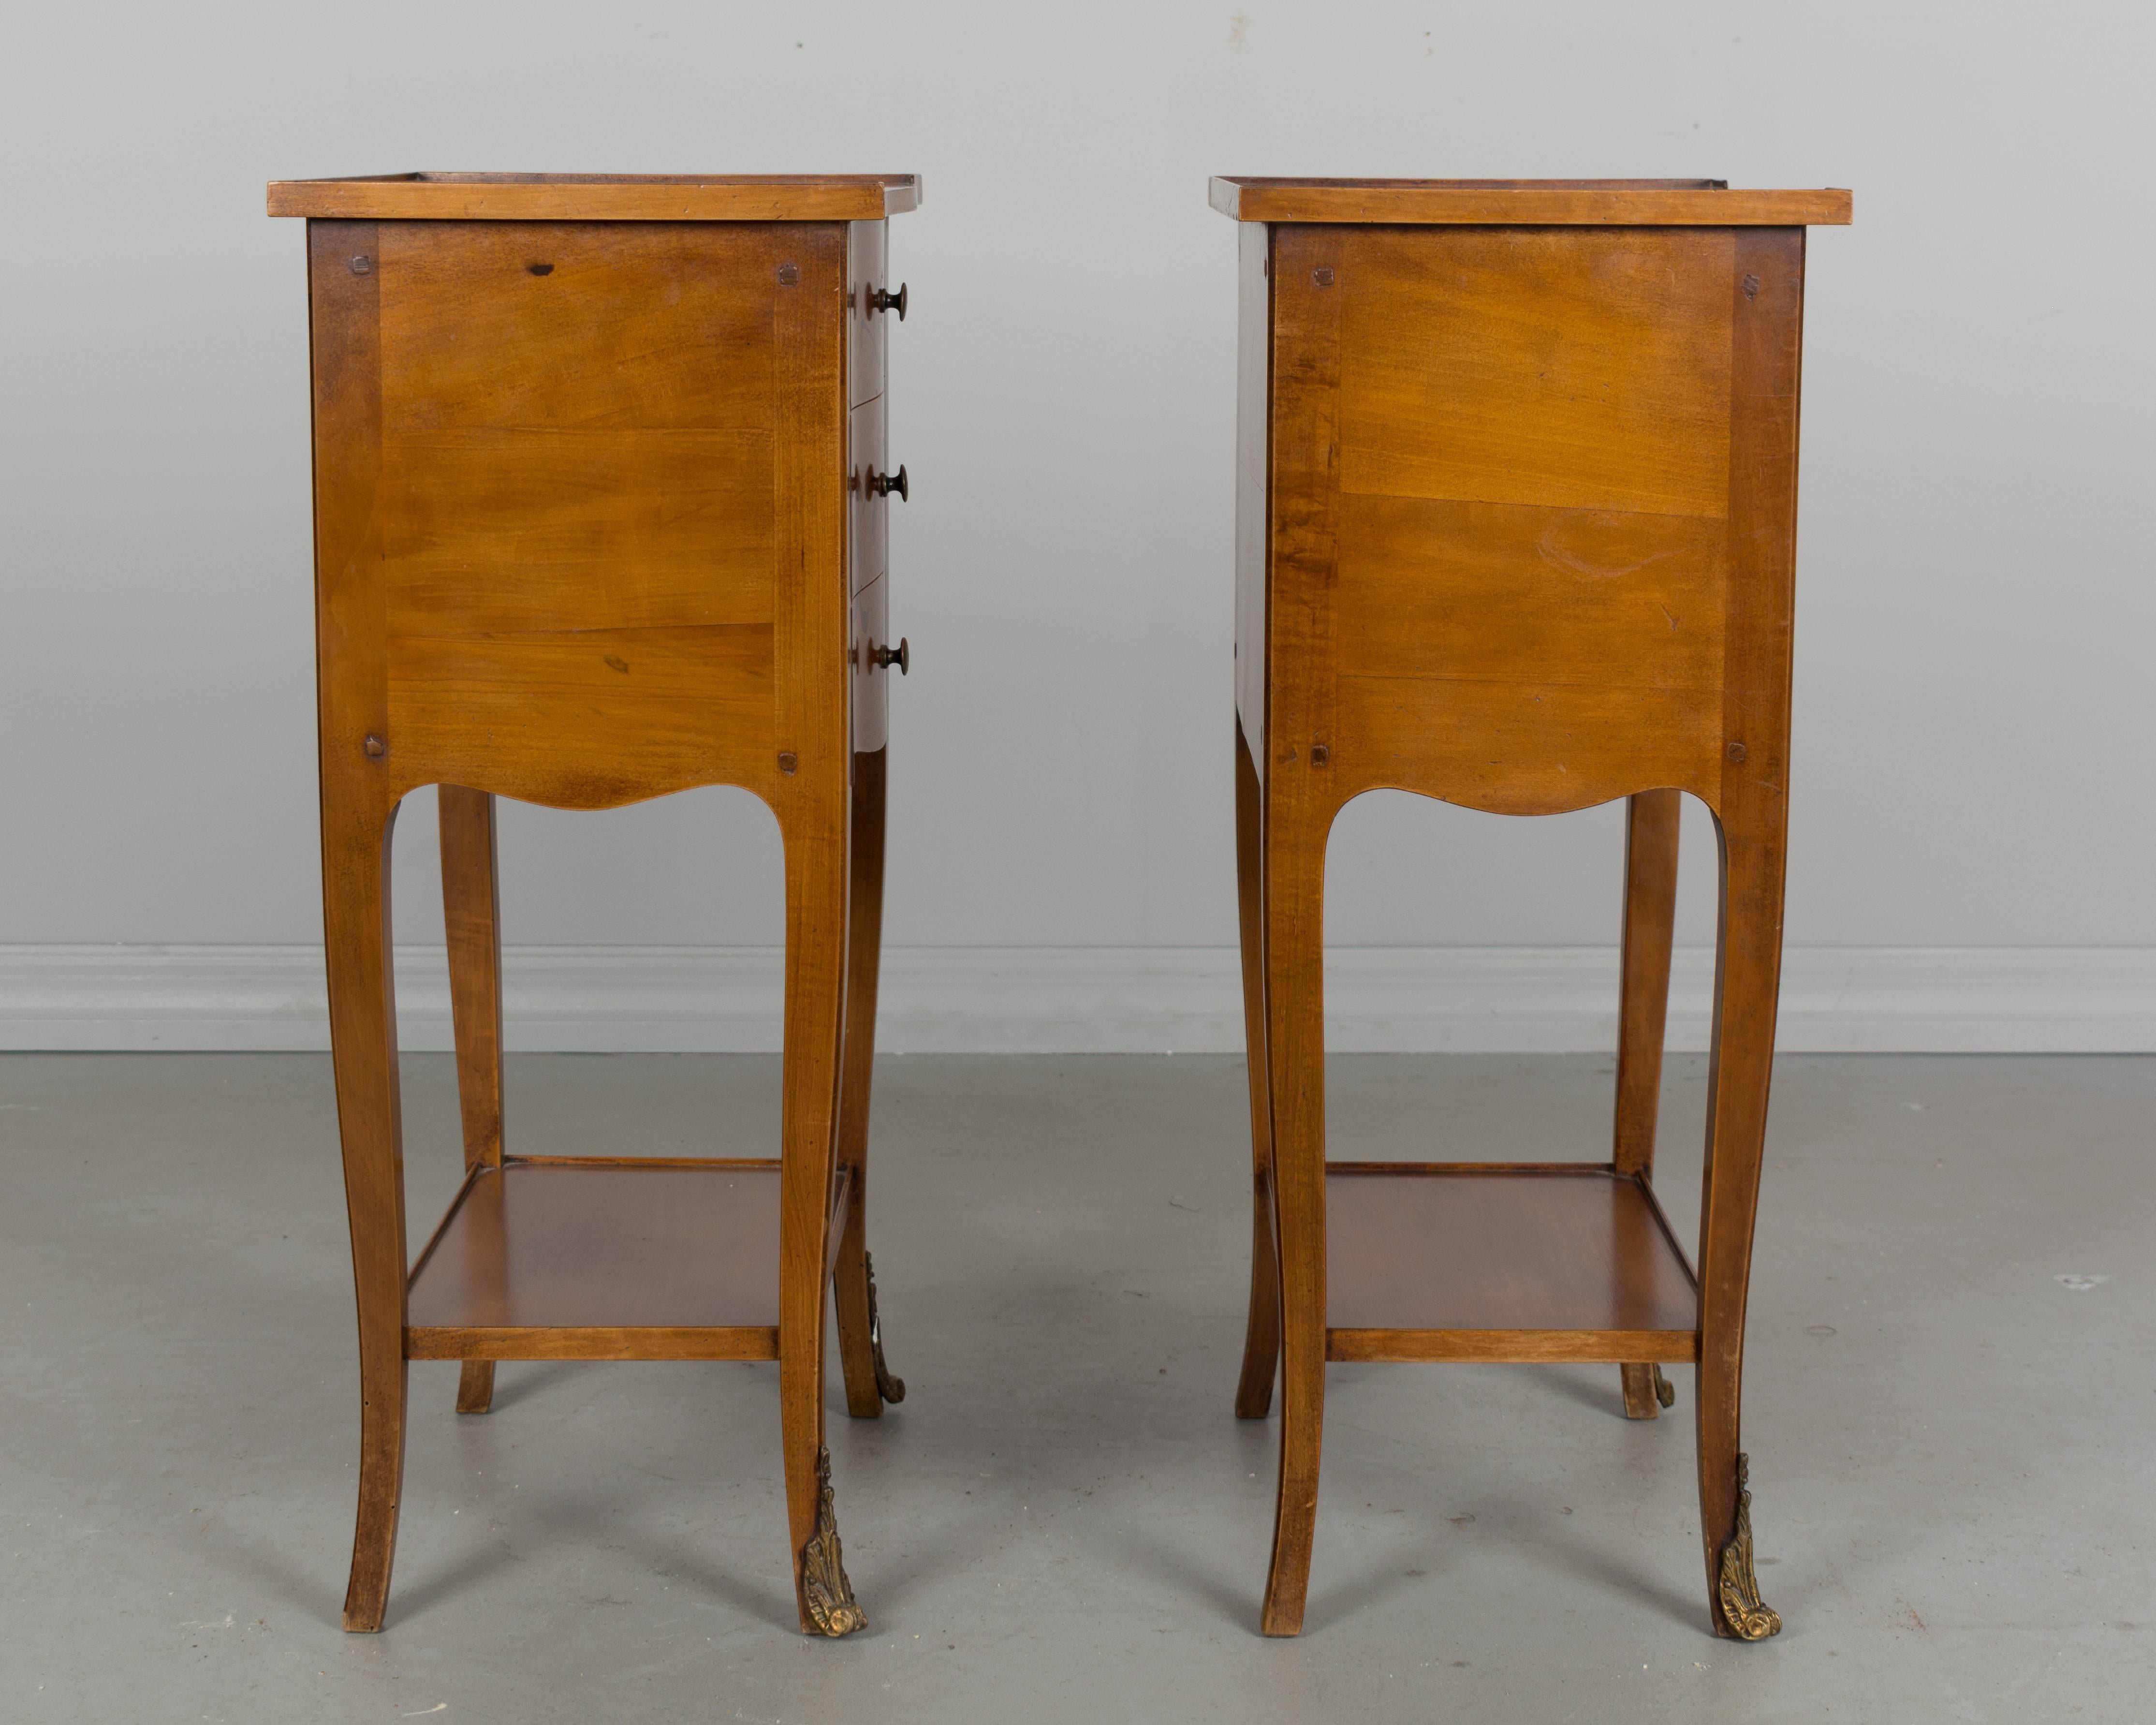 20th Century Pair of French Marquetry Side Tables or Nightstands